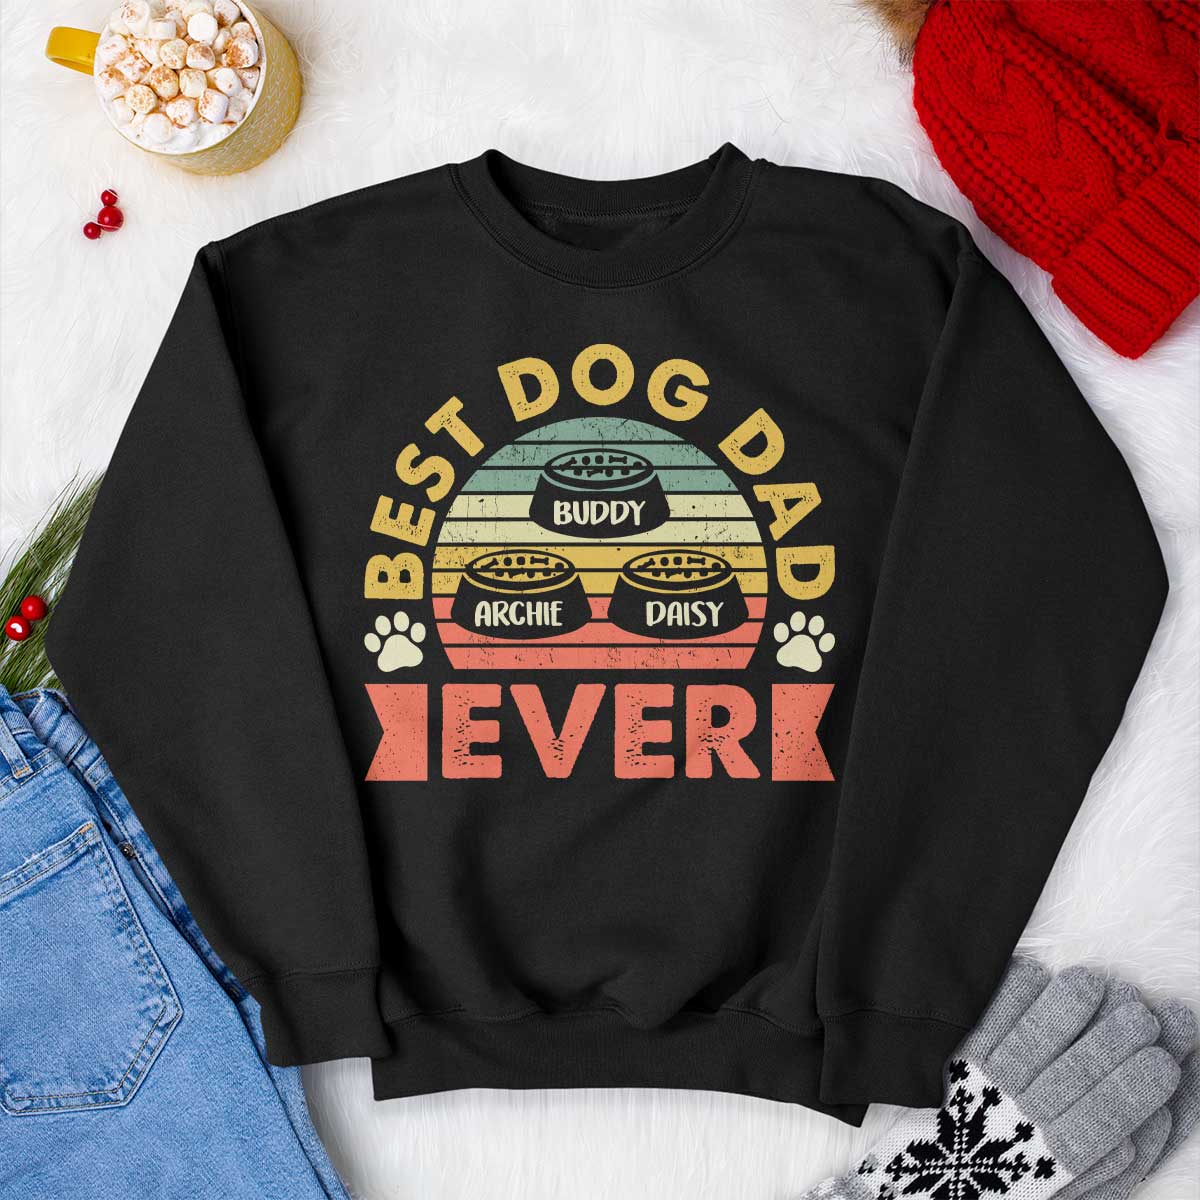 You prepared a special gift for Dads on your list this year, but you may miss a special man out - your best dog dad ever. Father's Day may pass quickly, but it’s never too late to give something to loved ones. Let this personalized sweatshirt take your pressure off. Ensure your husband can’t help but smile at this cute gift for pet lovers.